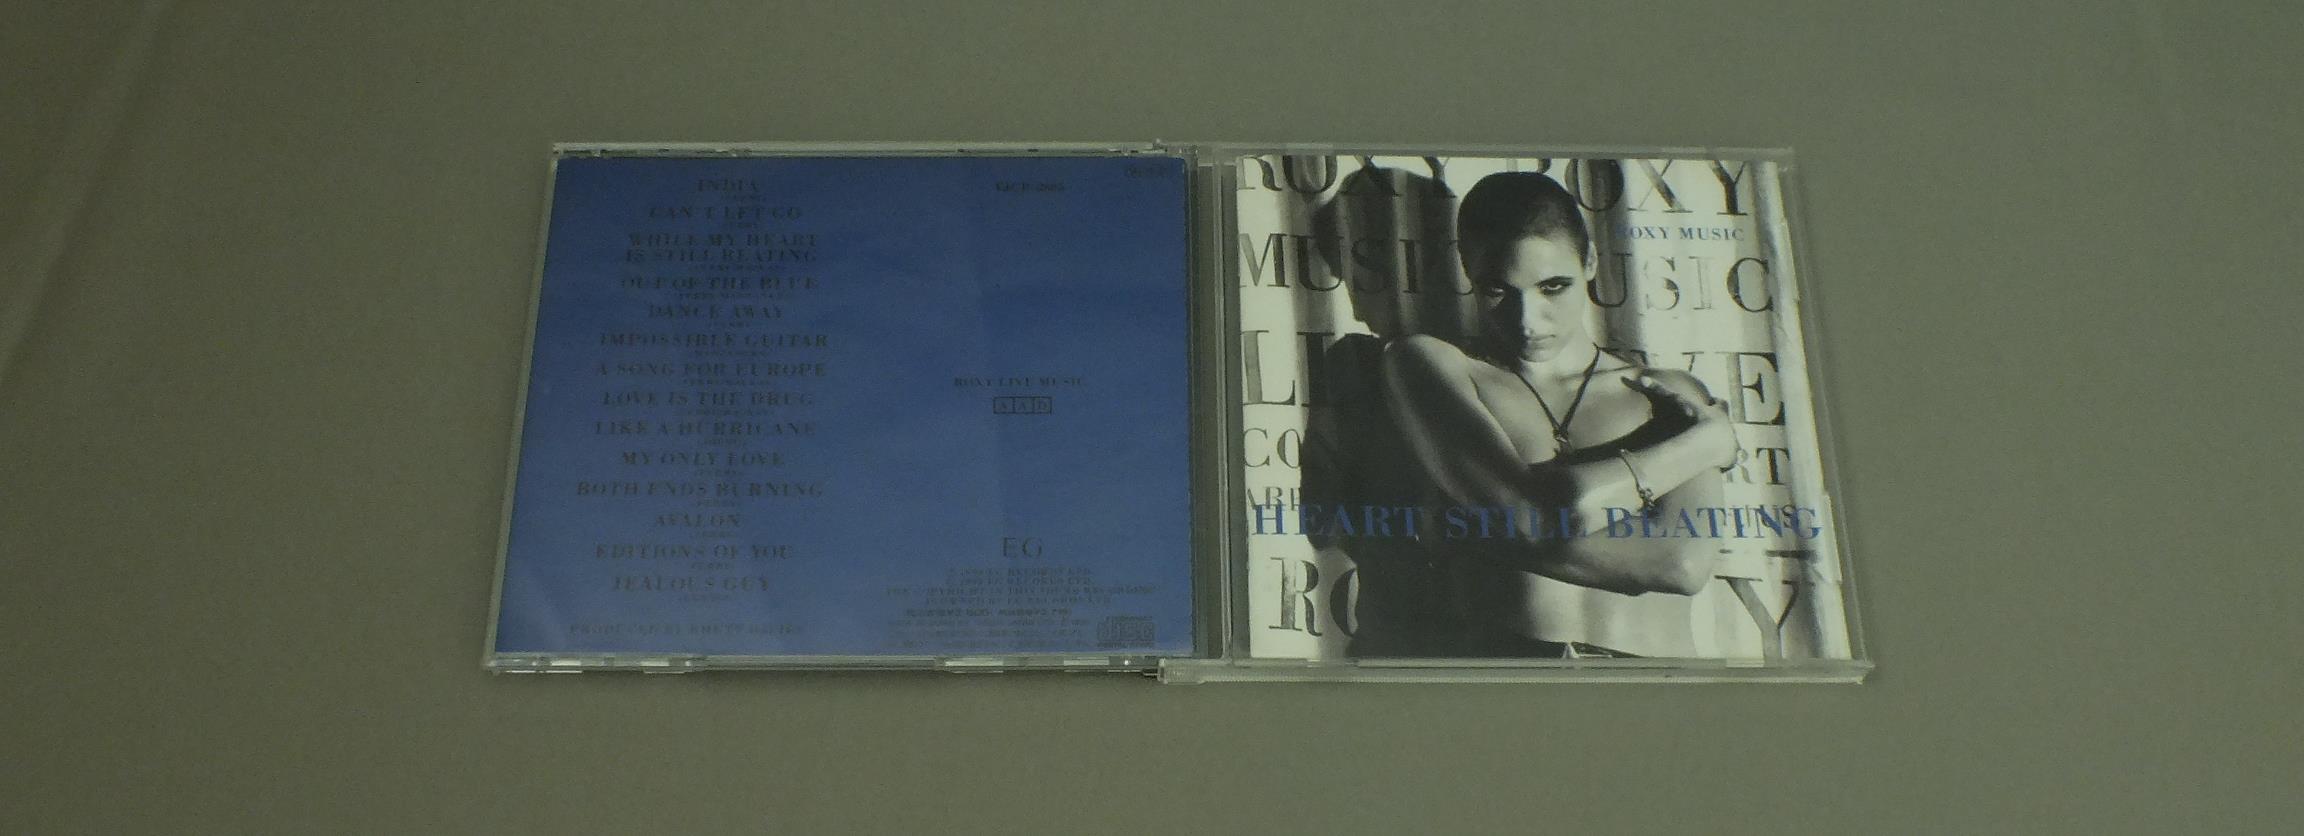 Heart Still Beating Live In France 19 By Roxy Music Cd With Fineday Music Records Ref